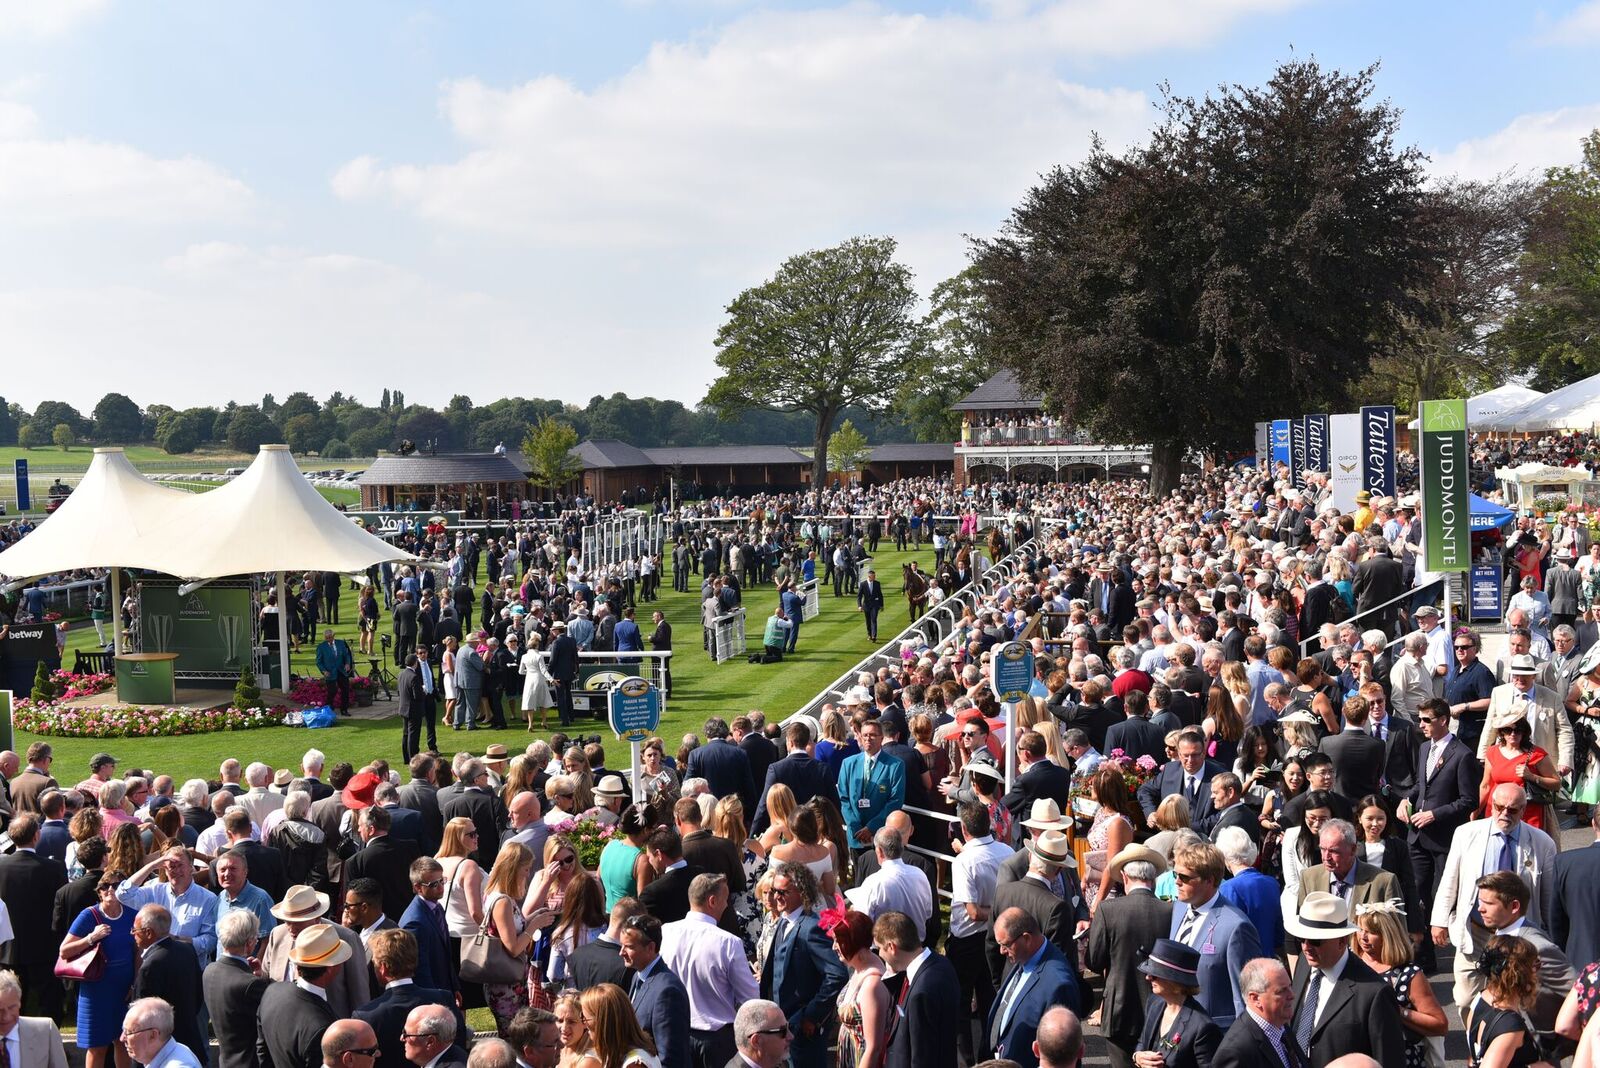 The northern end of the racecourse in full swing during last year's Ebor meeting. Photo: York Racecourse